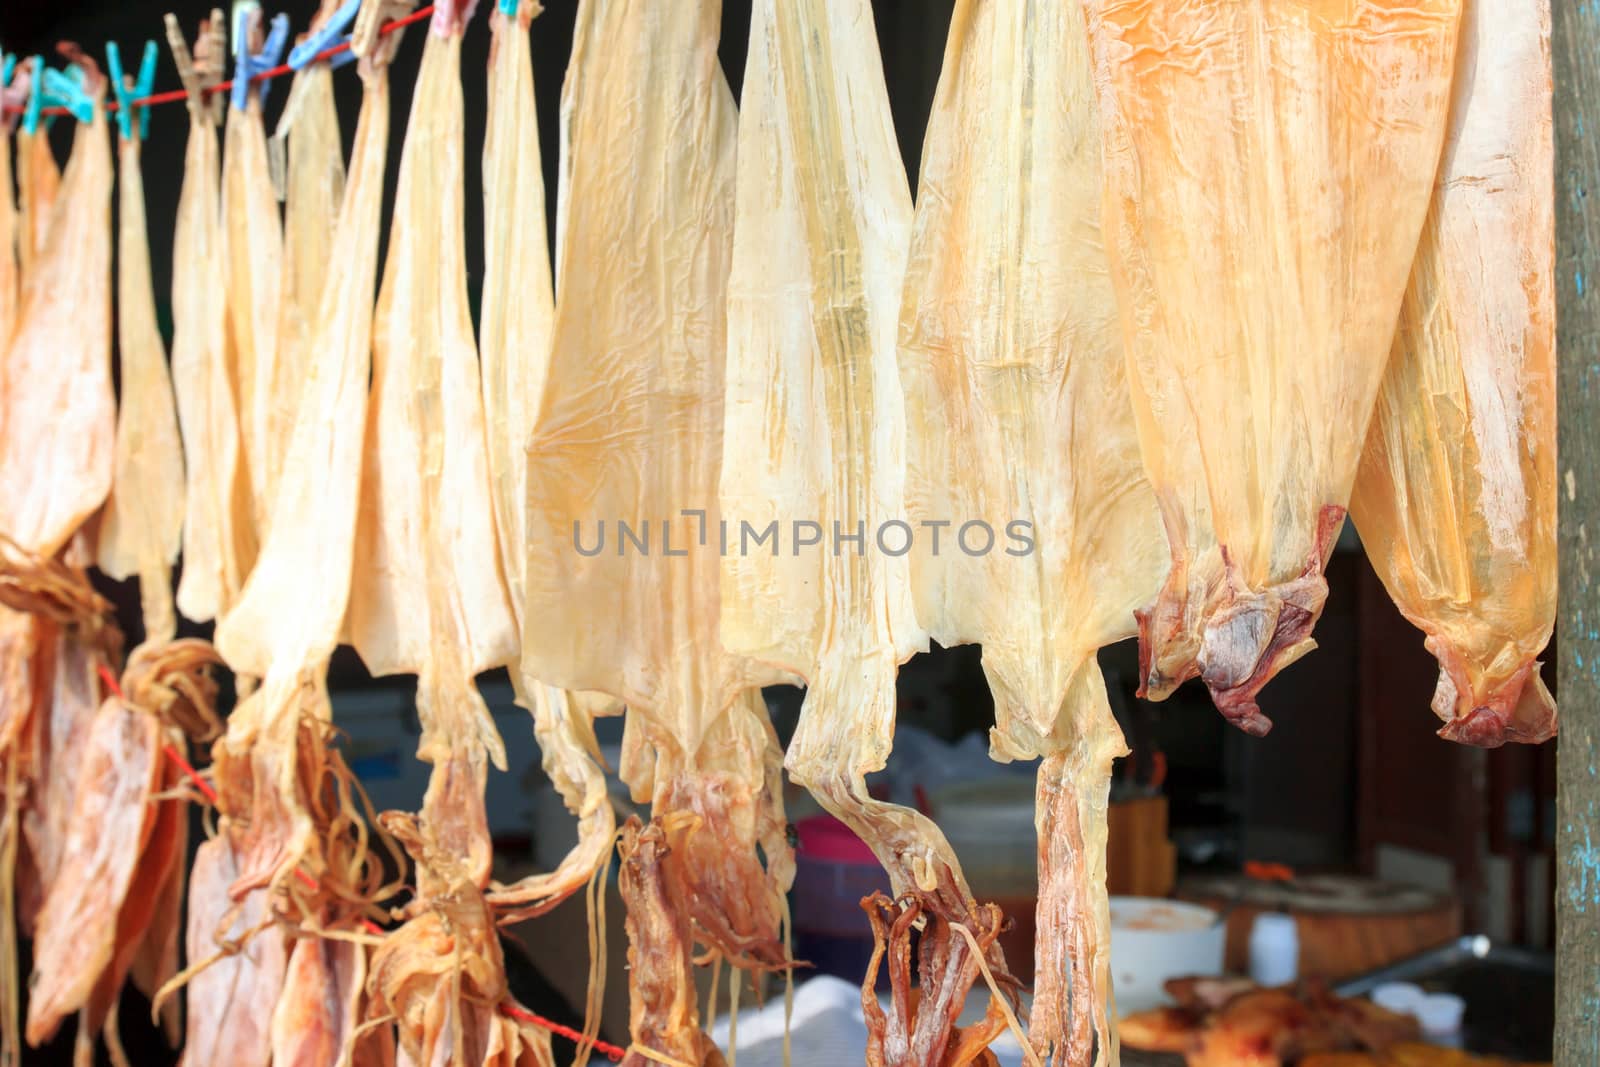 Dried squid is hanging aligned direct sunlight.